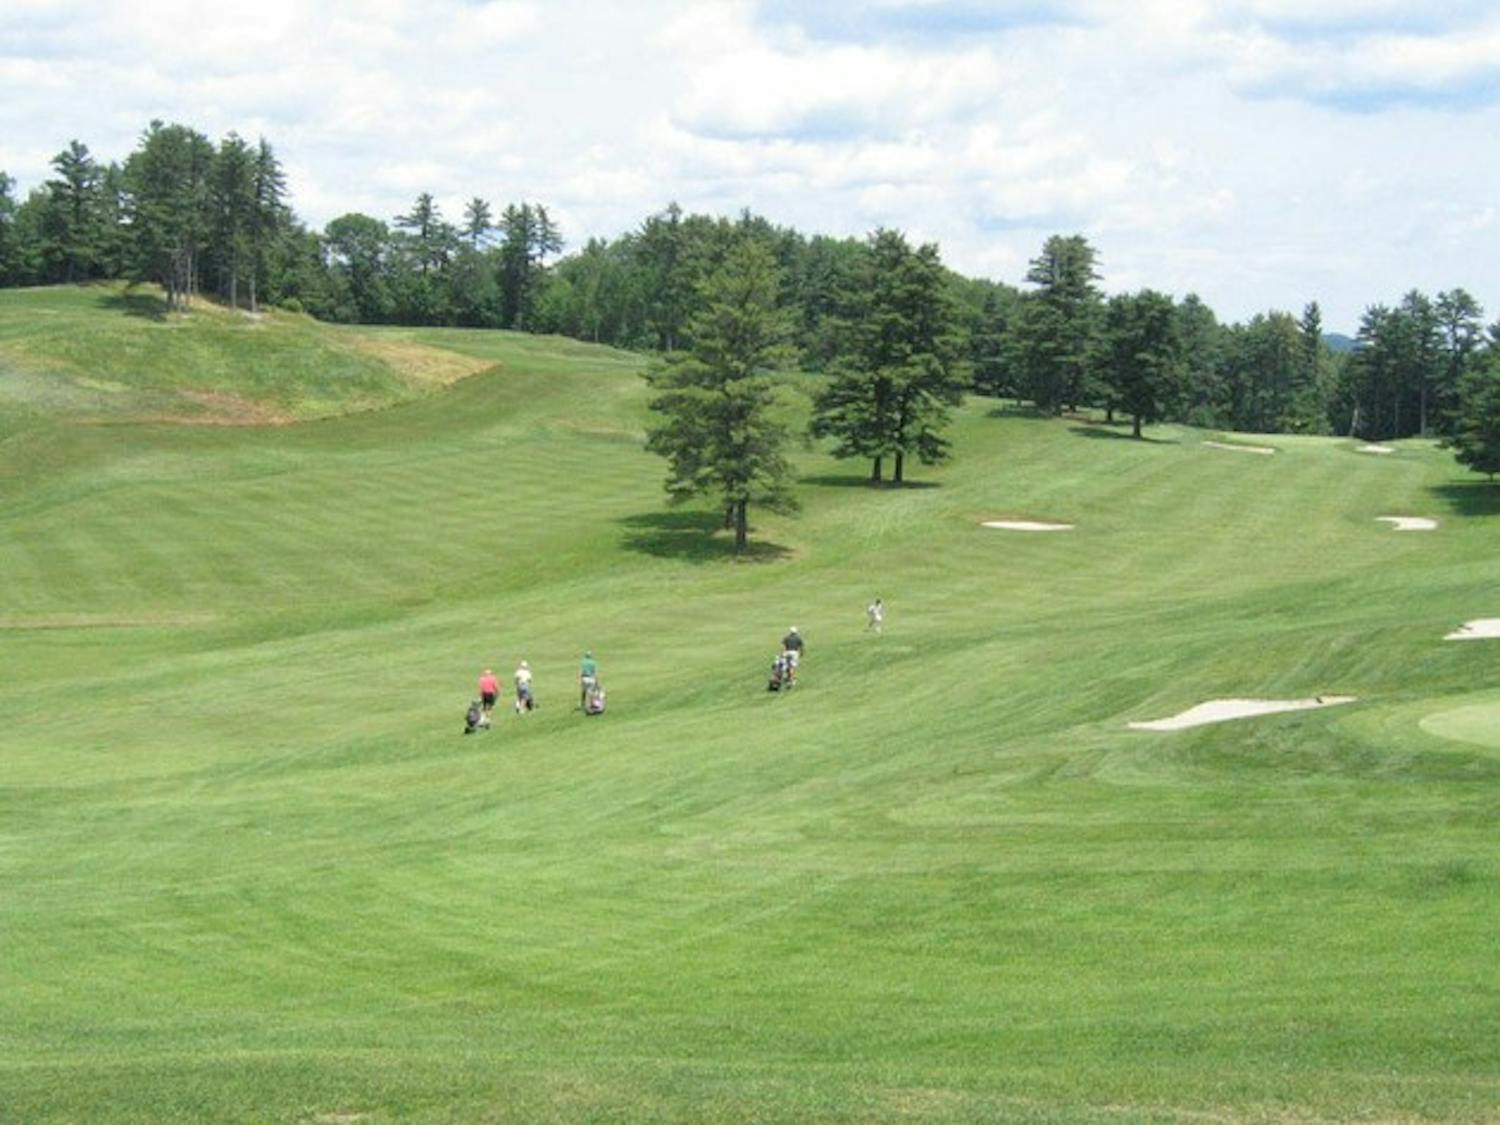 Dartmouth students enjoy reduced greens fees at the Hanover Country Club, paying only $25 per 18 holes at the 6,500 yard golf course.